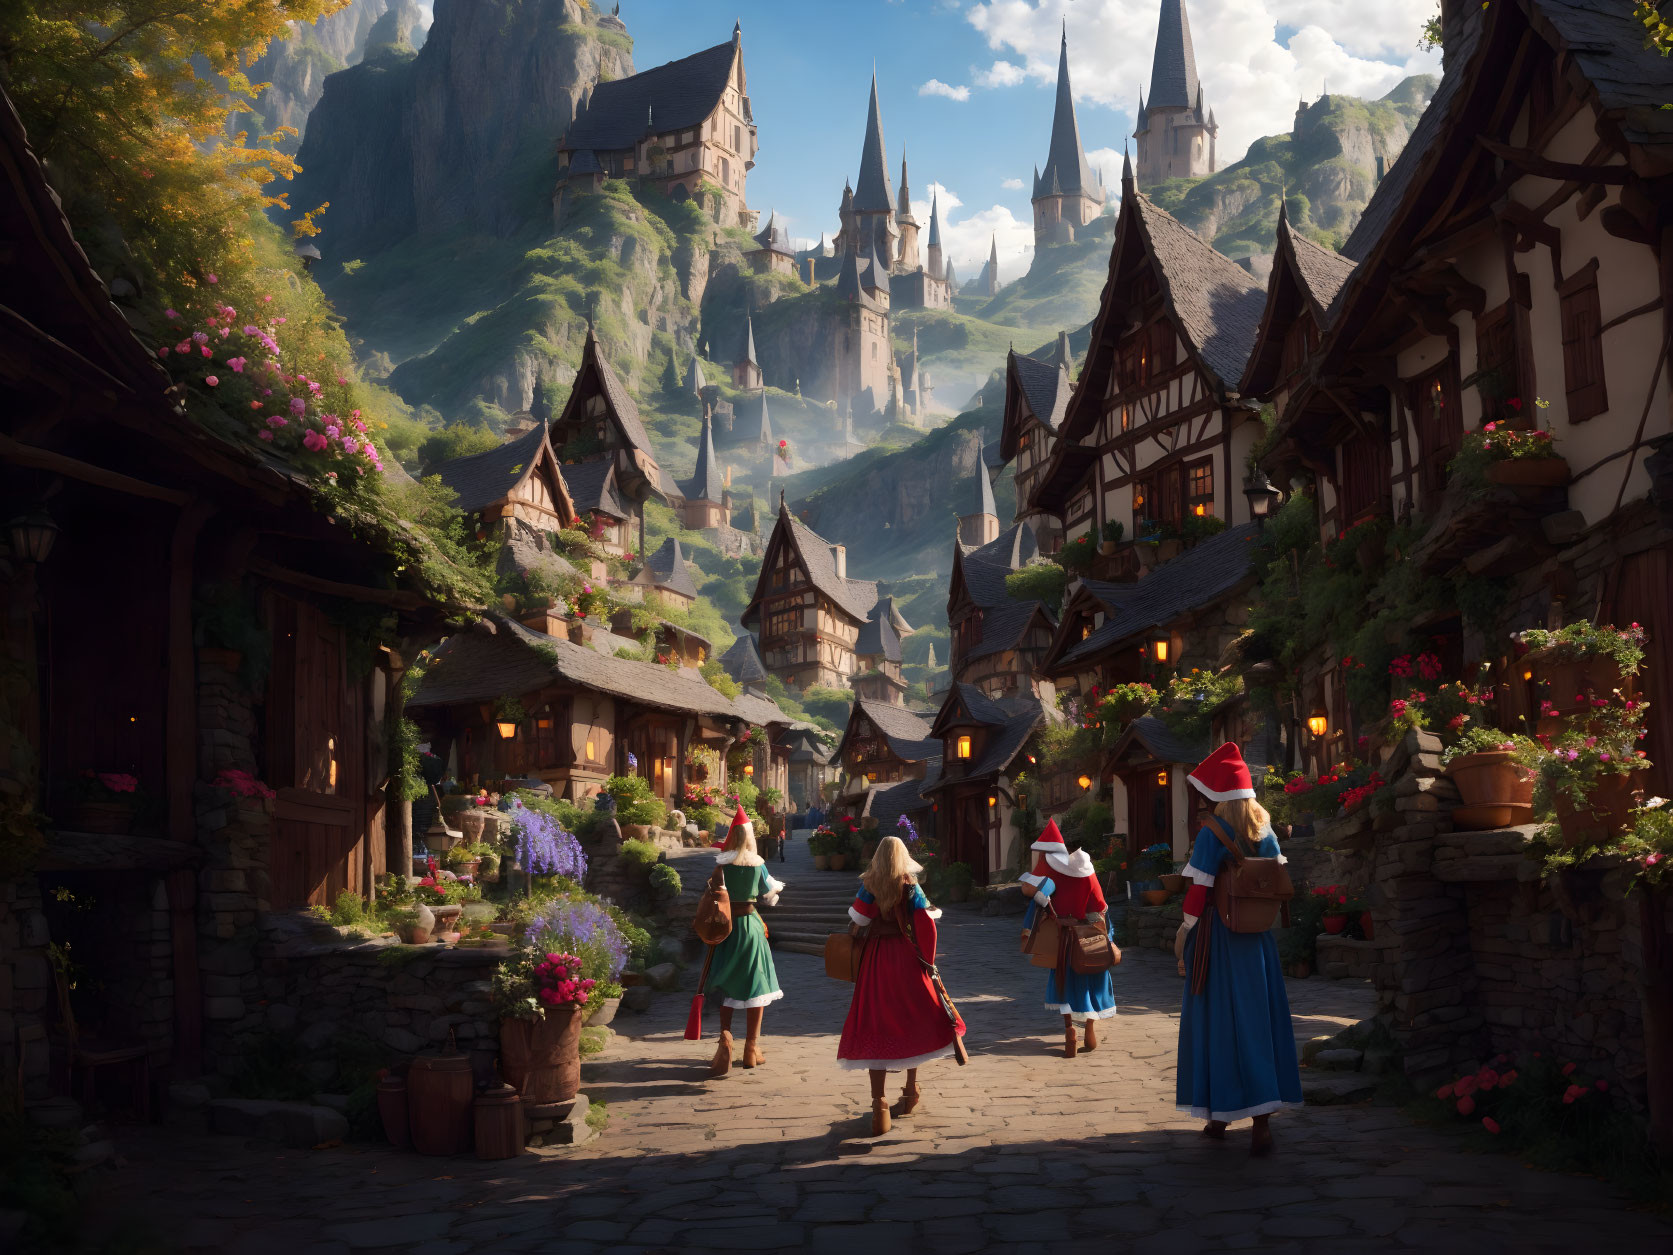 Through the streets of an elven village